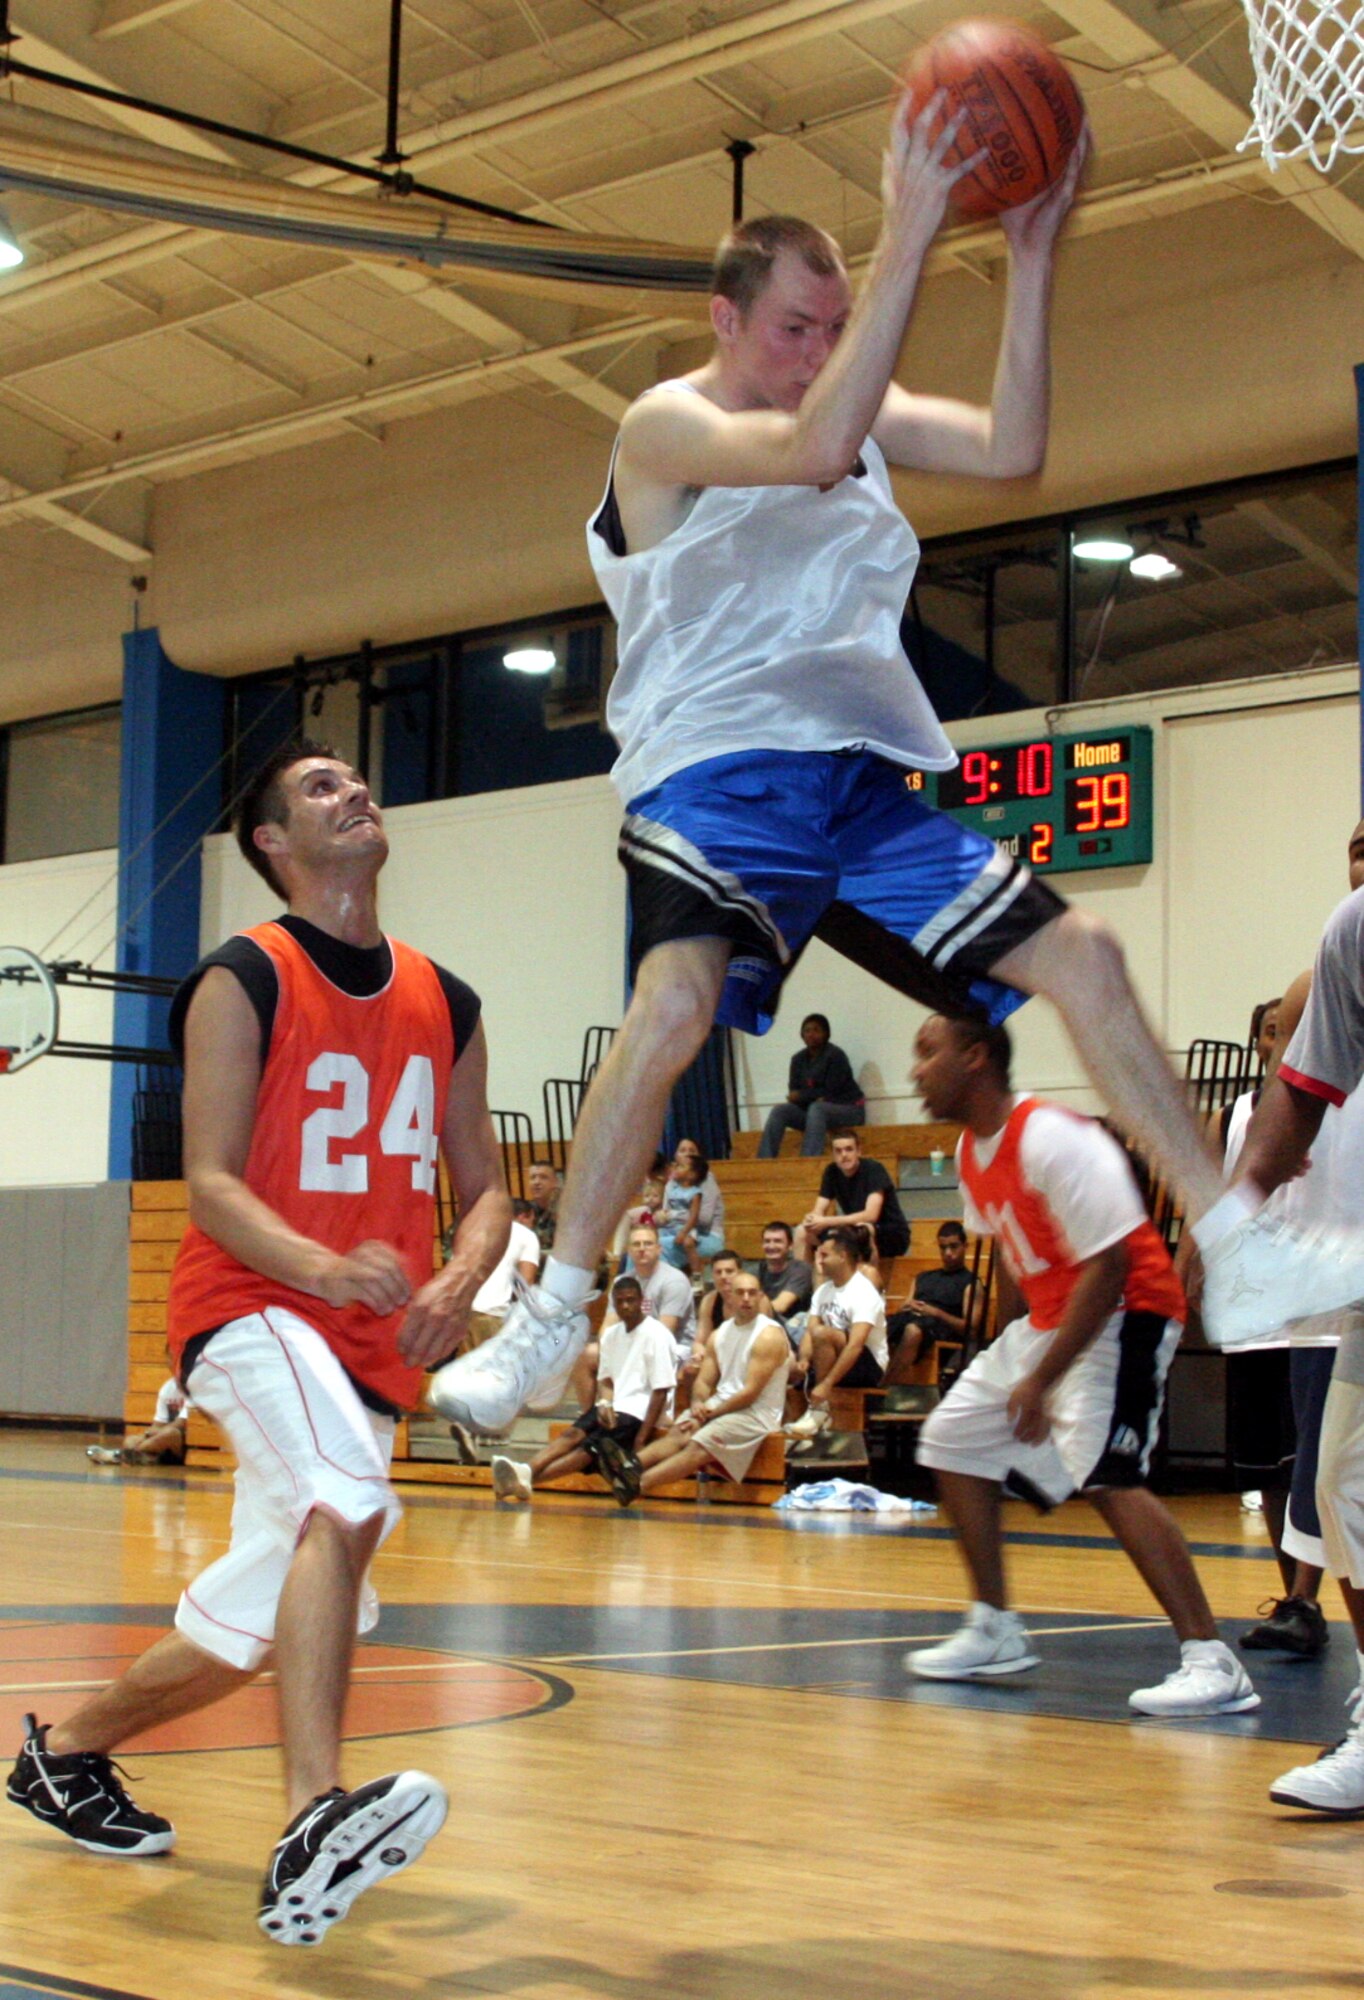 Jeff White, 16th Equipment Maintenance Squadron, rips down a defensive rebound in front of Lee Elamn, 16th Security Forces Squadron Wednesday night.  EMS won the first game of the 2006 intramural basketball playoffs with a 57-48 jailing of SFS.